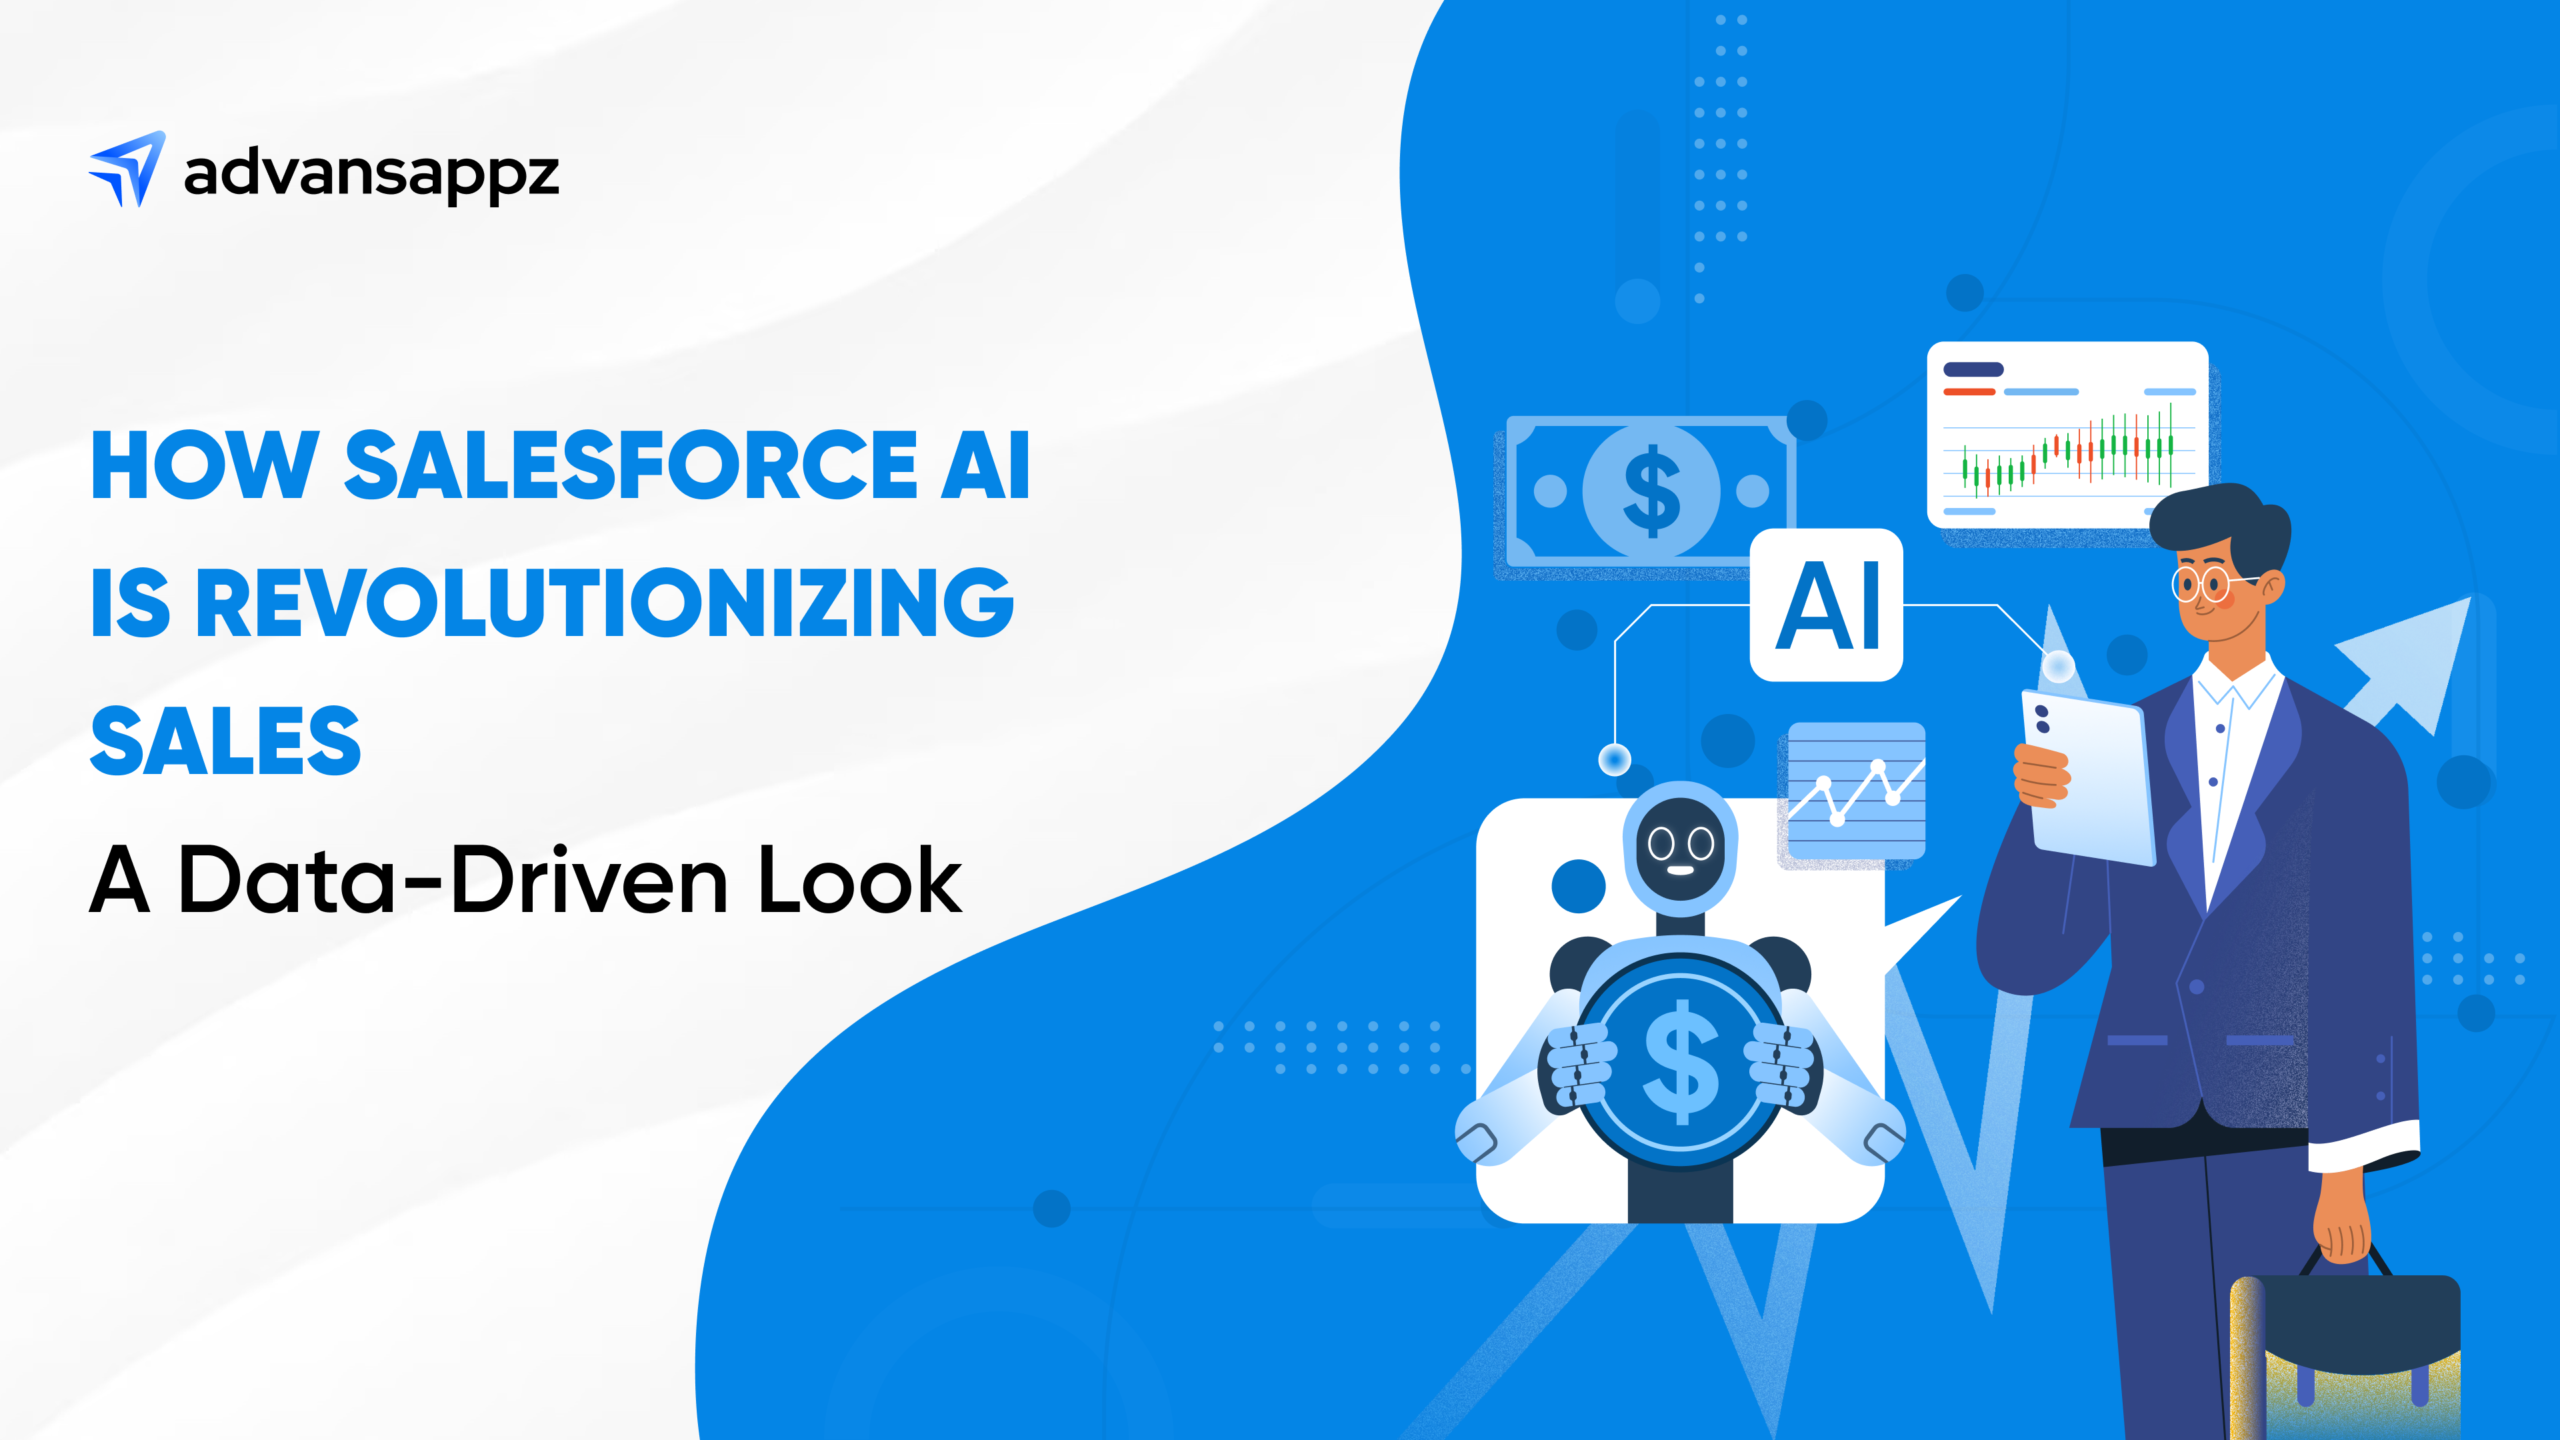 How Salesforce AI is Revolutionizing Sales: A Data-Driven Look